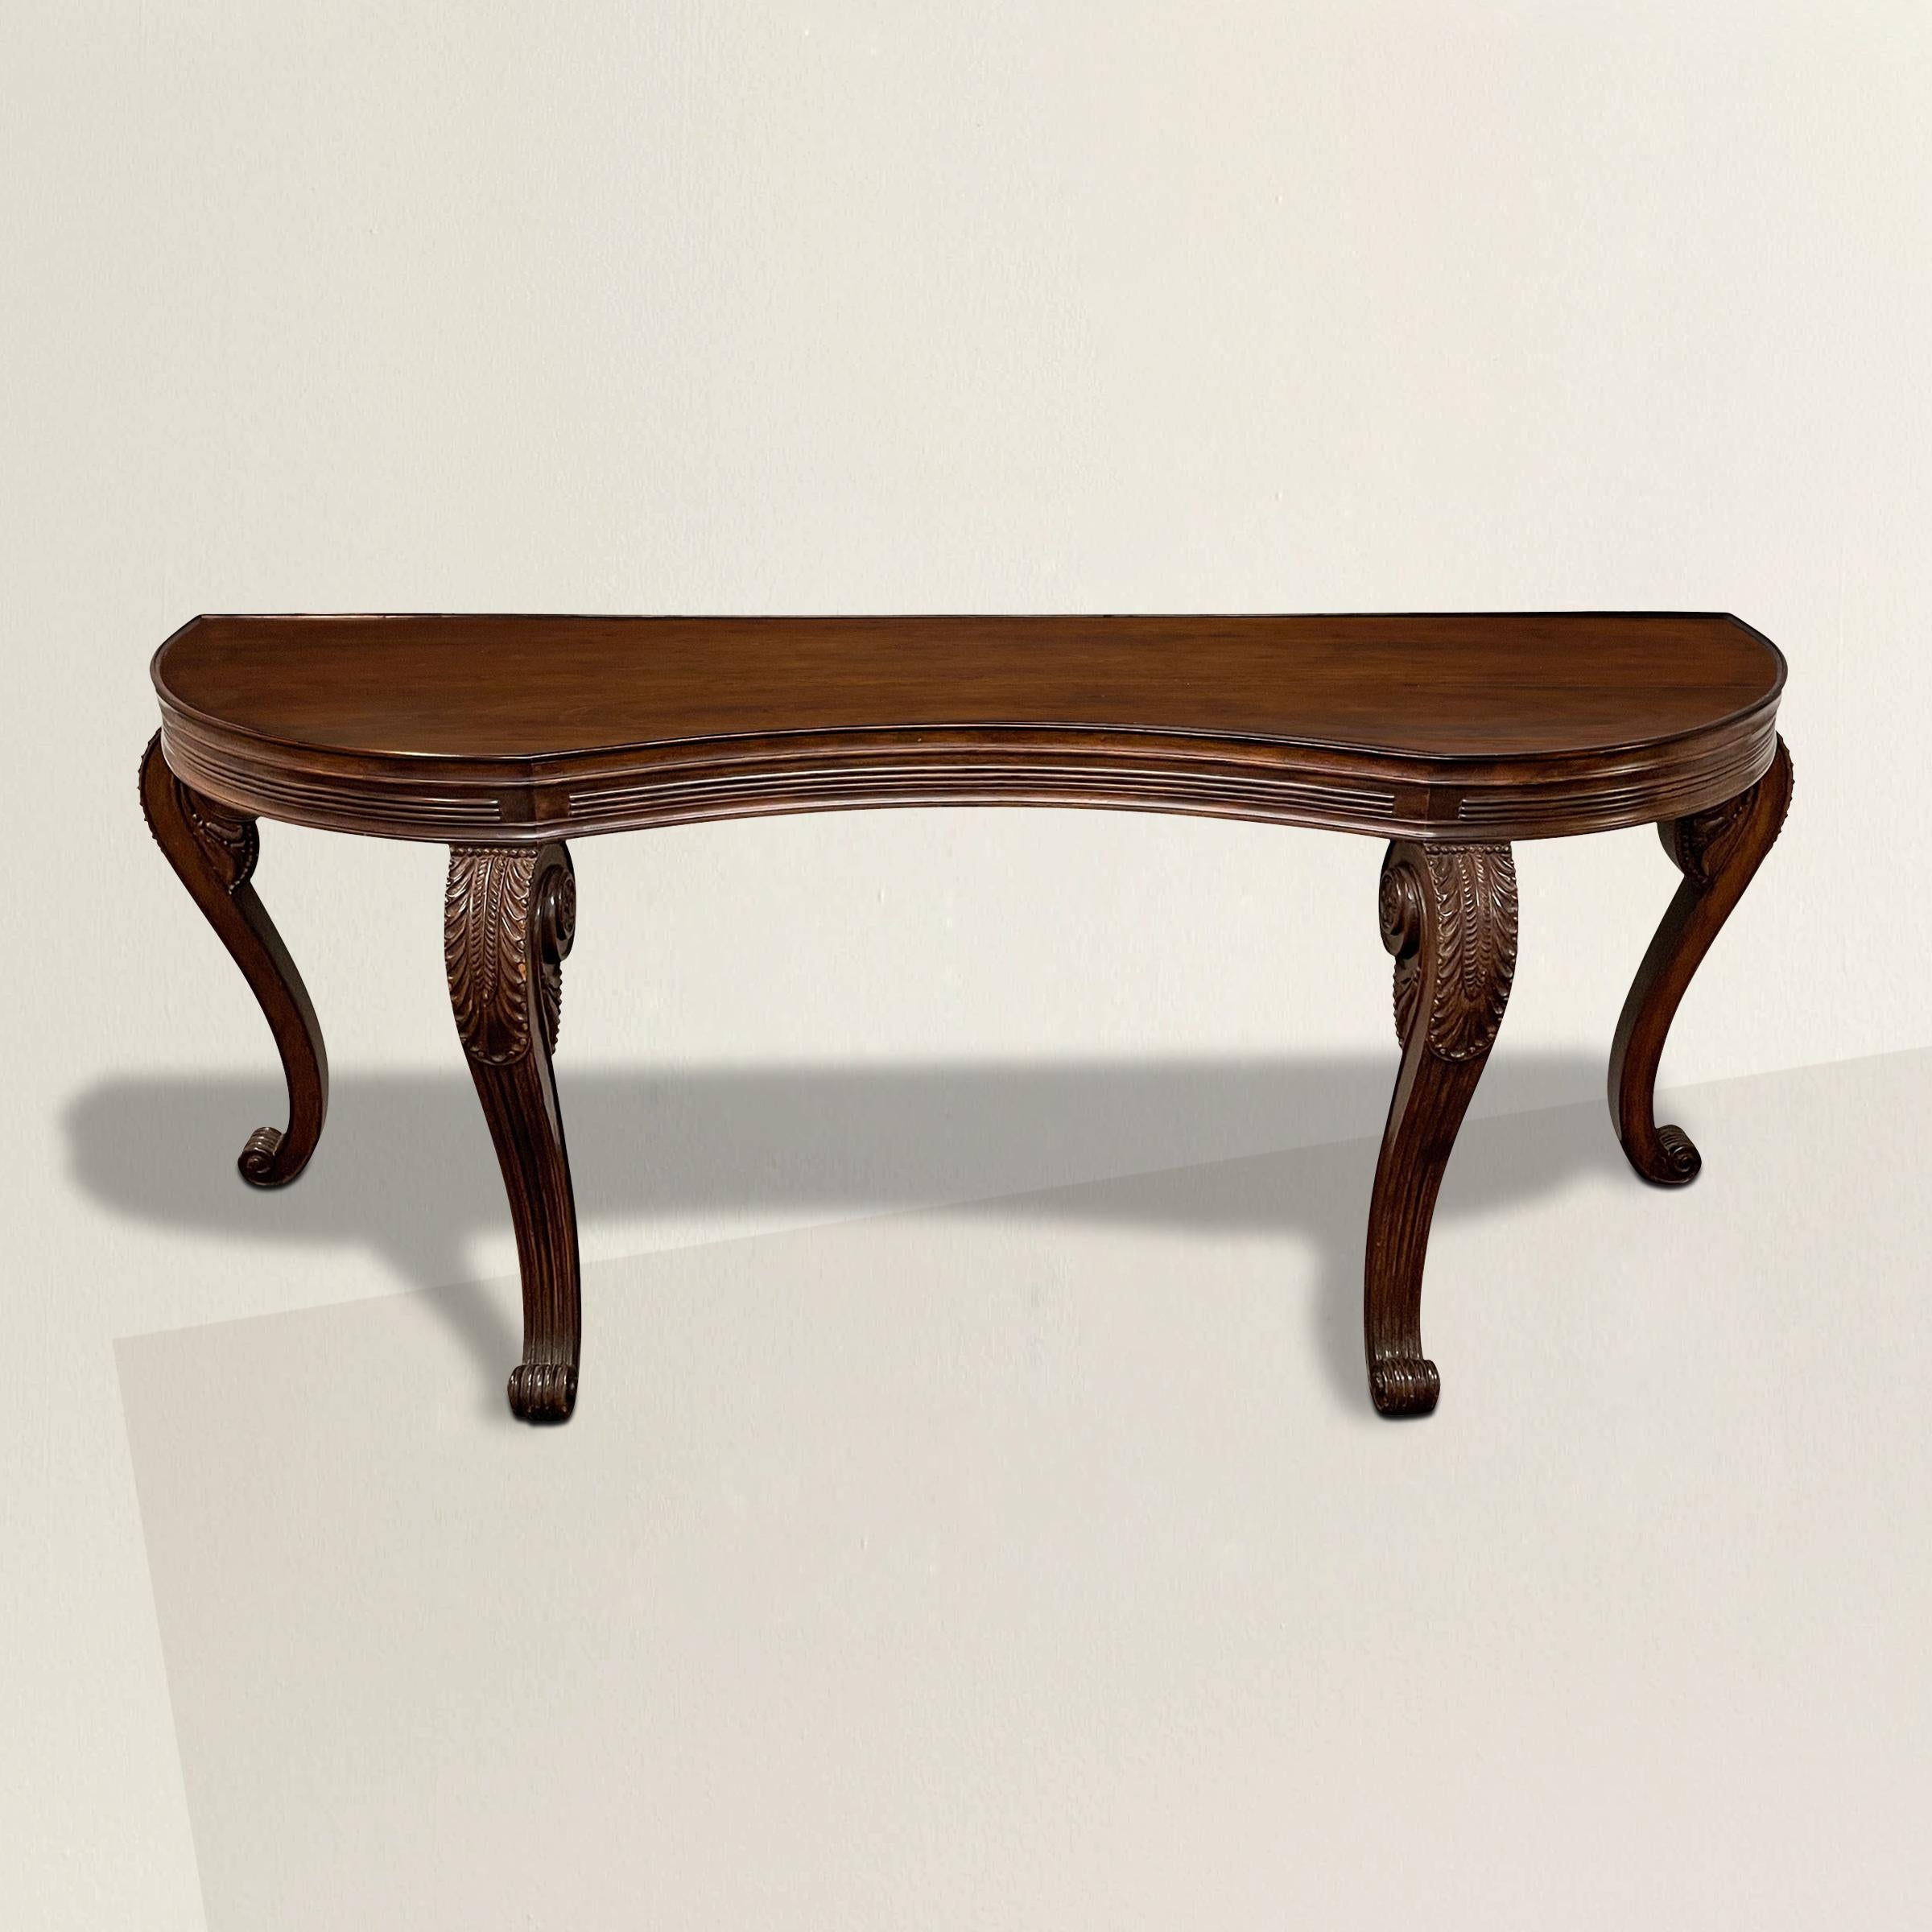 A remarkable massive 20th century Georgian-style walnut console table with a serpentine front, a reeded apron, and four cabriole legs with carved acanthus leaves details and scrolled feet. Perfect as a console table or sideboard in your dining room.